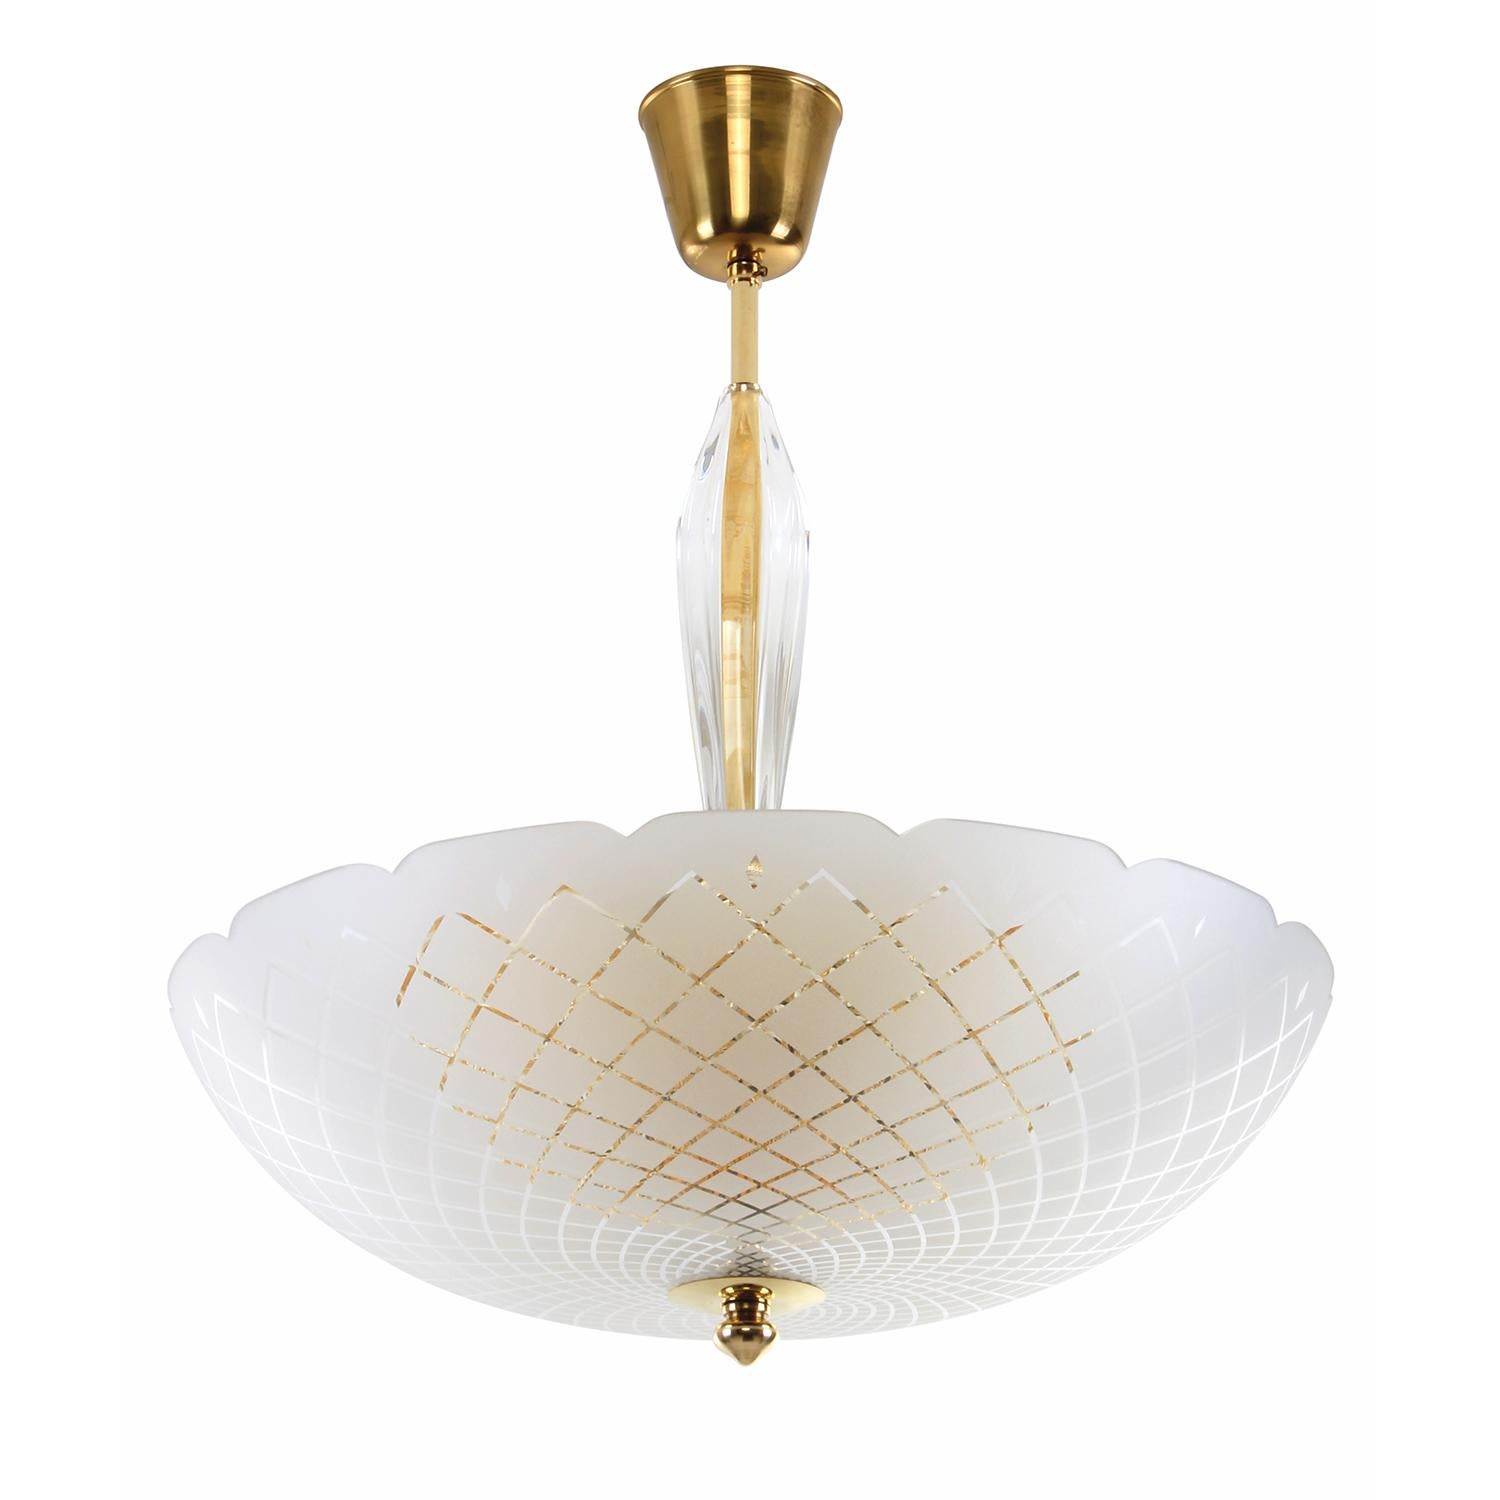 Mid-Century Modern Orrefors Chandelier Large Crystal Chandelier by Lyfa/Orrefors in the 1950s For Sale